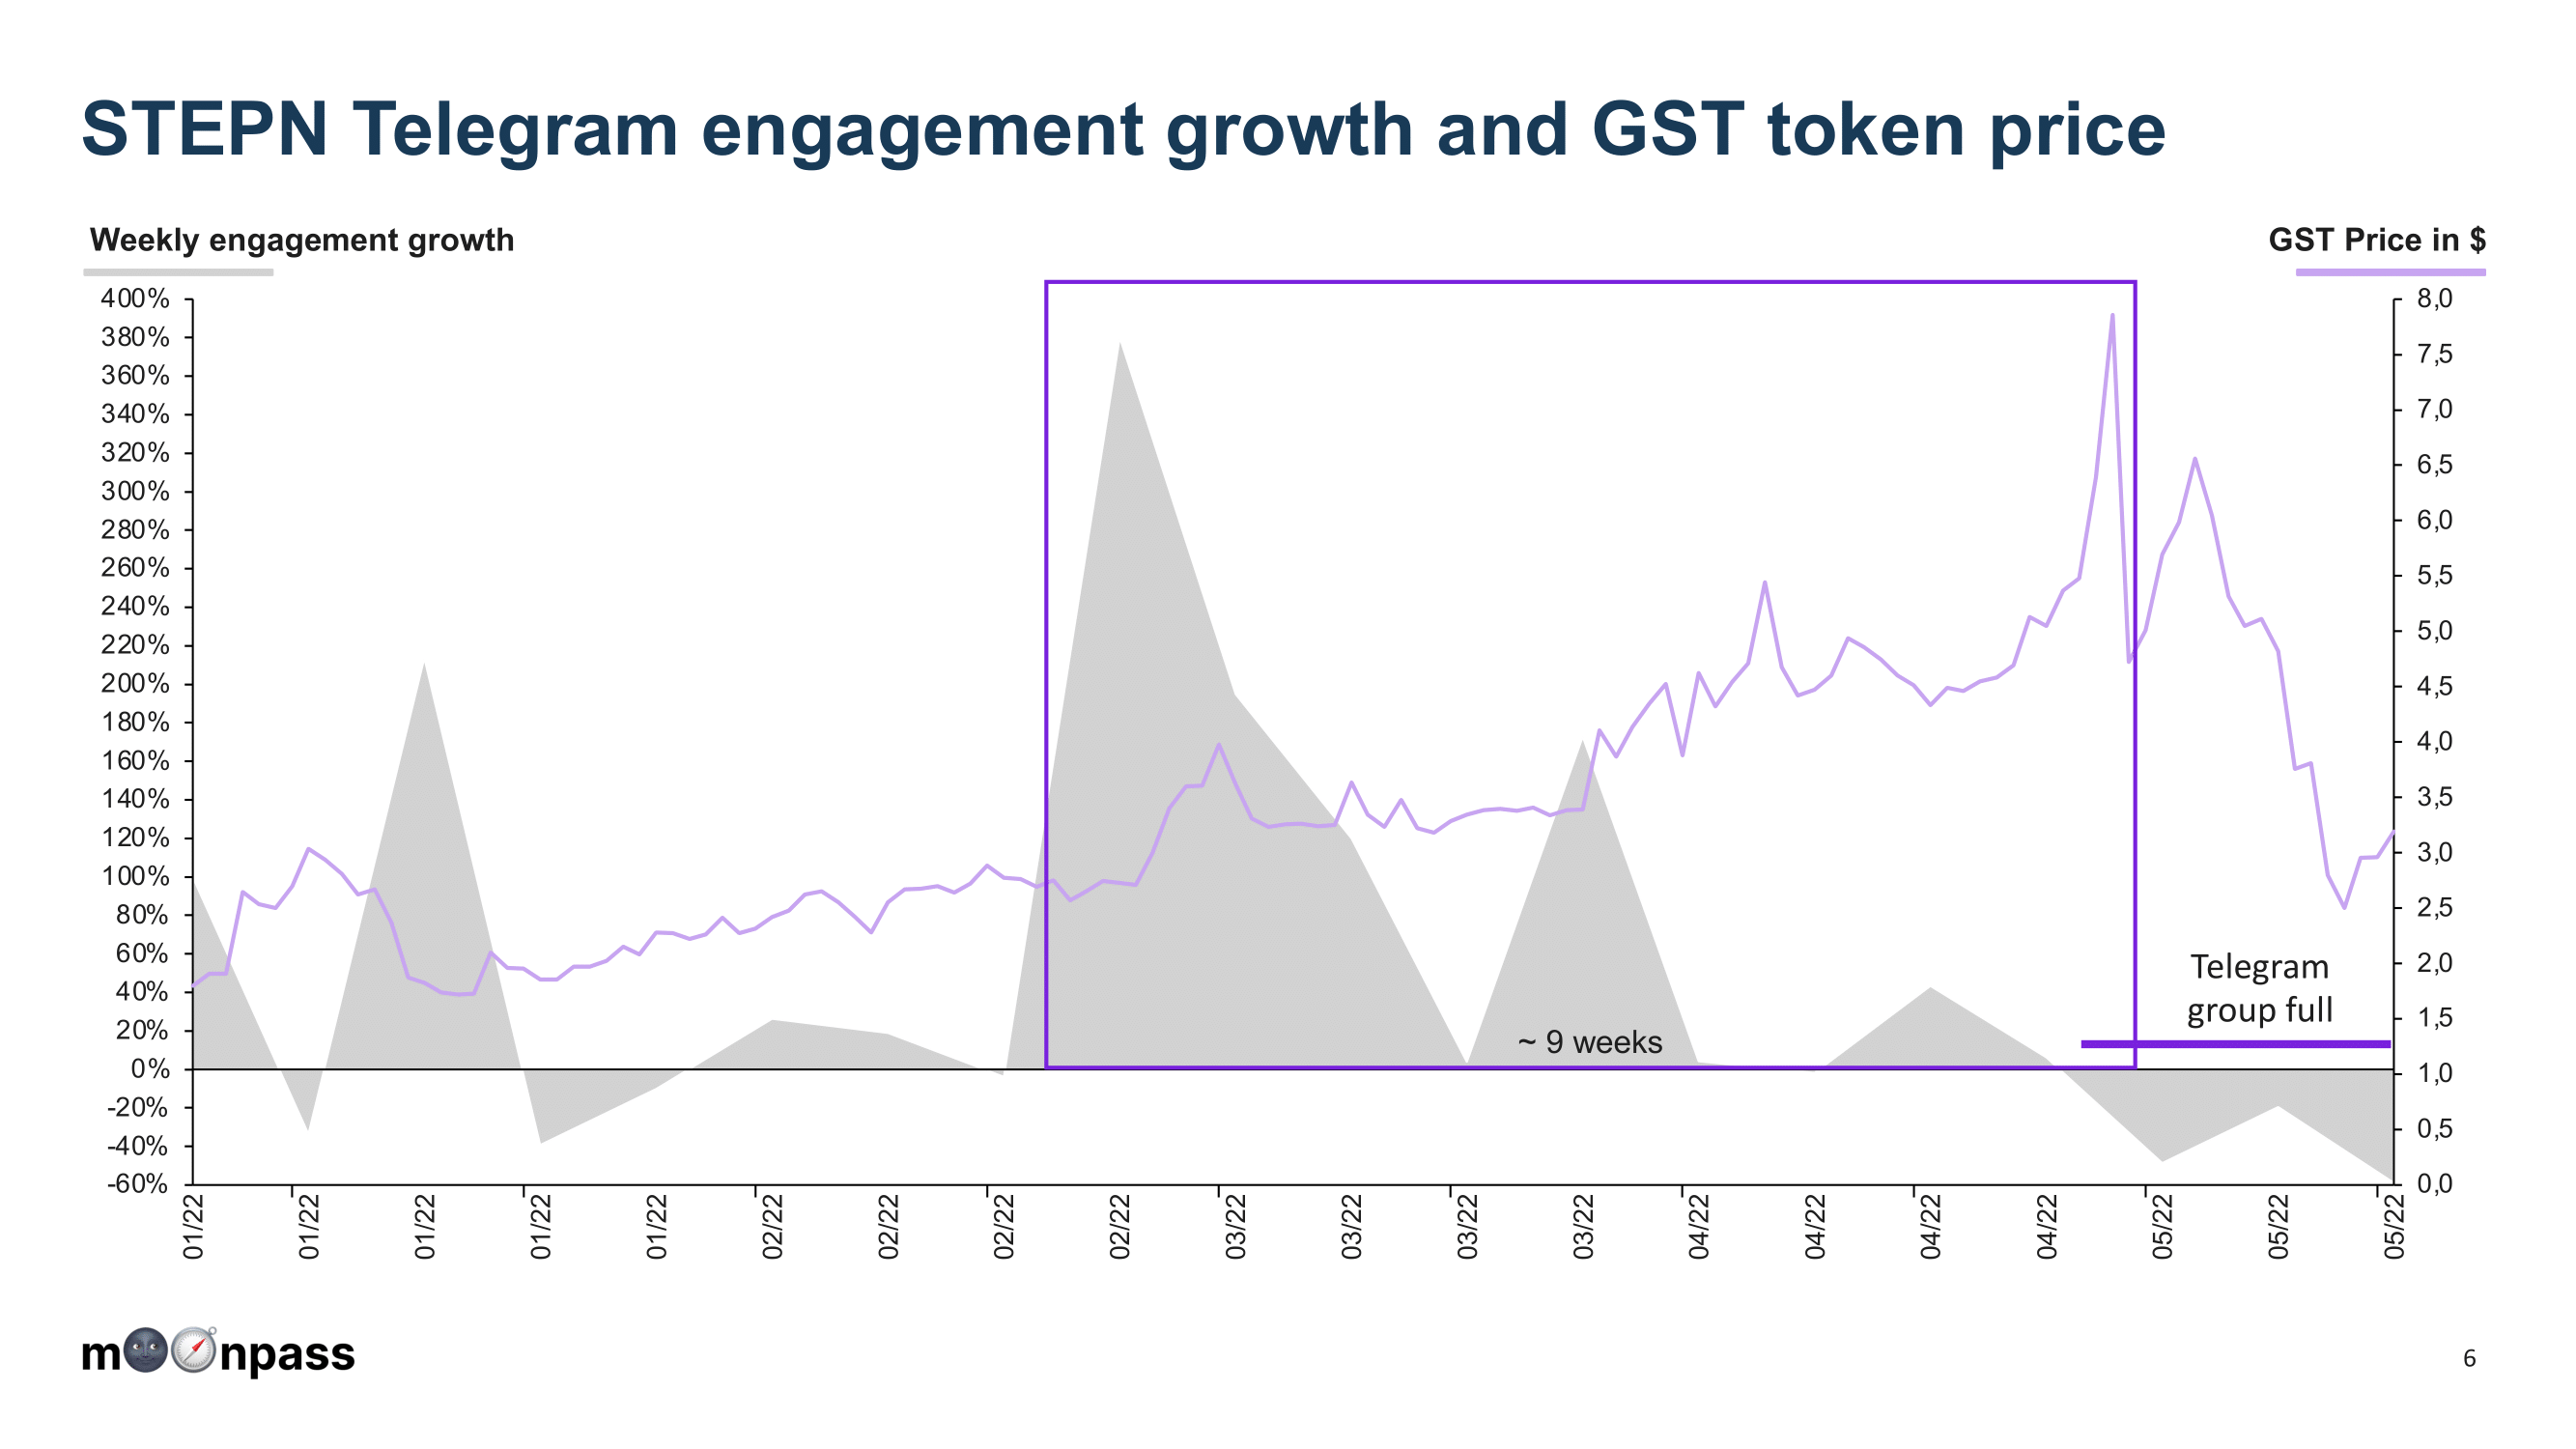 STEPN engagement as a proxy for the token price